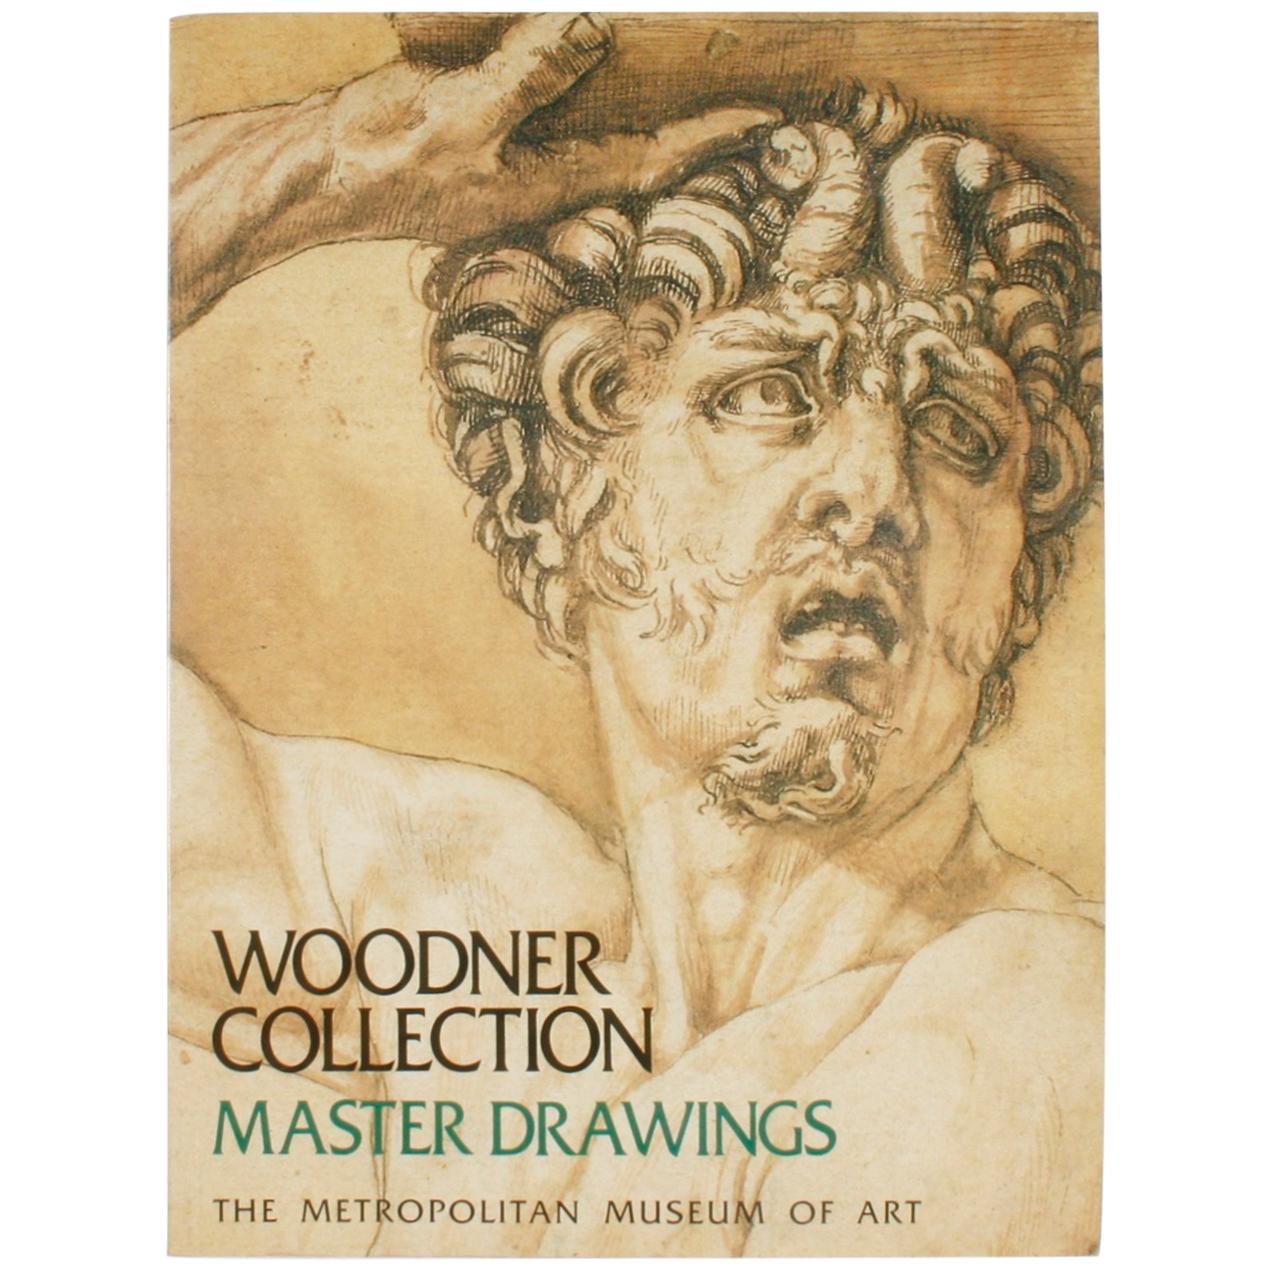 Woodner Collection Master Drawings, Exhibition Press Copy with Original Slides